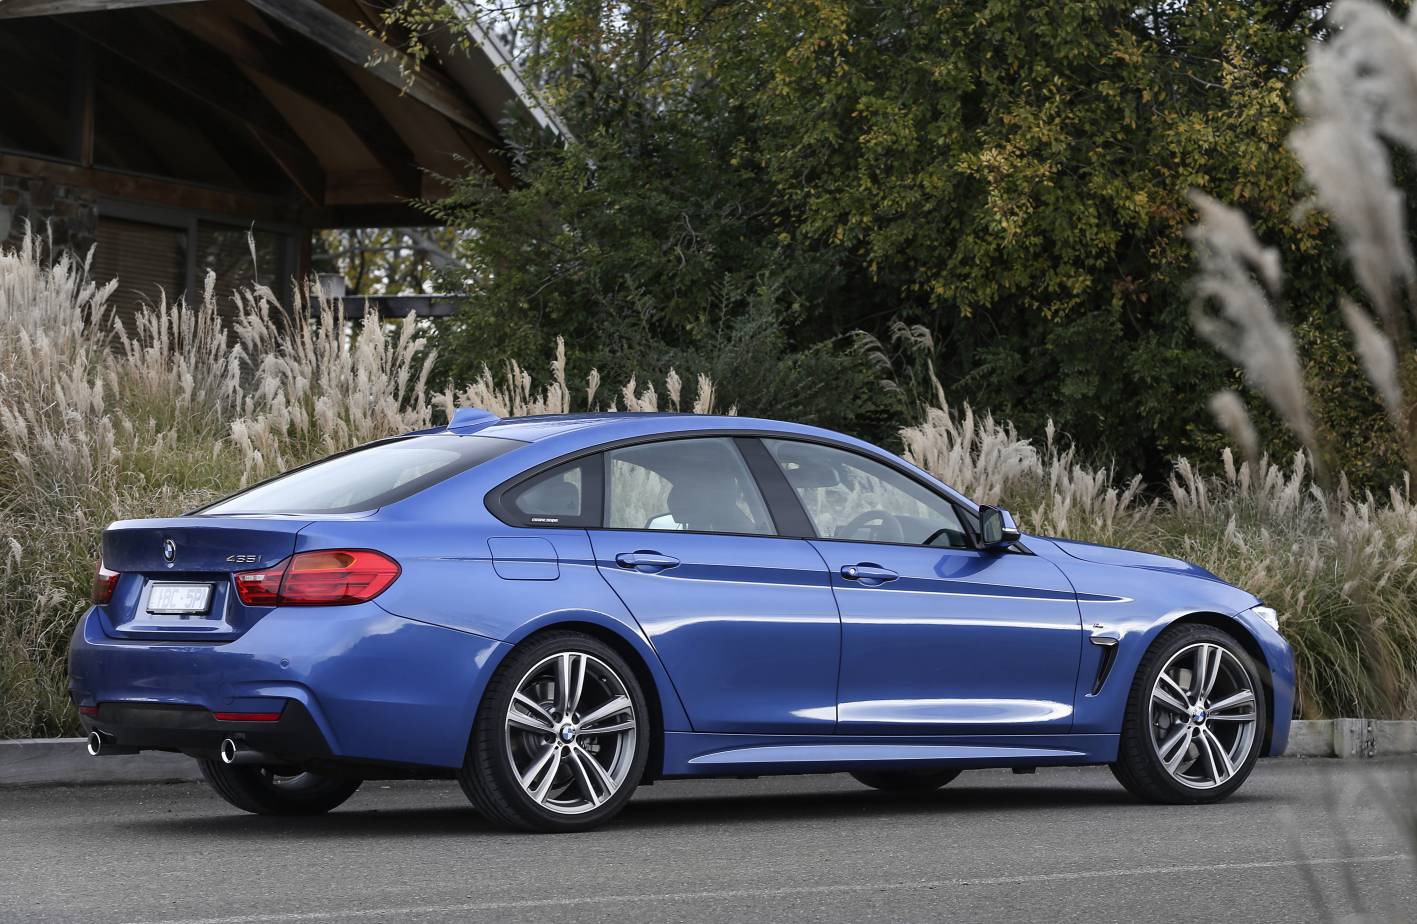 BMW Cars - News: 4 Series Gran Coupé pricing and specifications